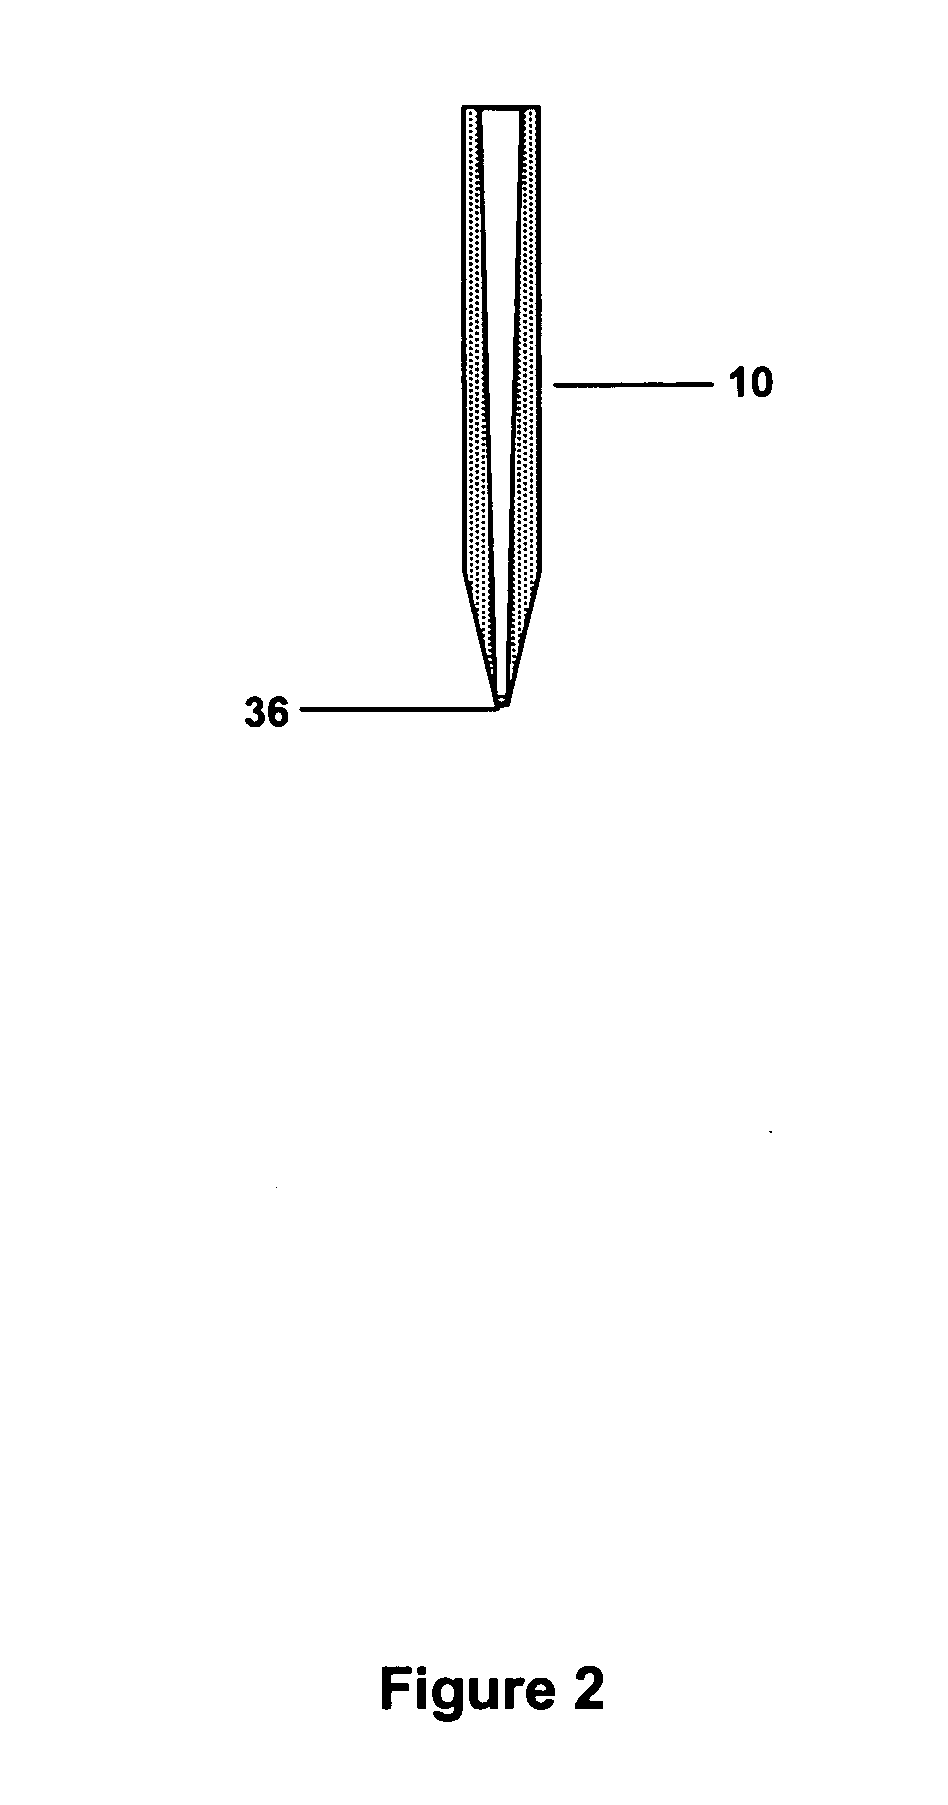 Annular aerosol jet deposition using an extended nozzle